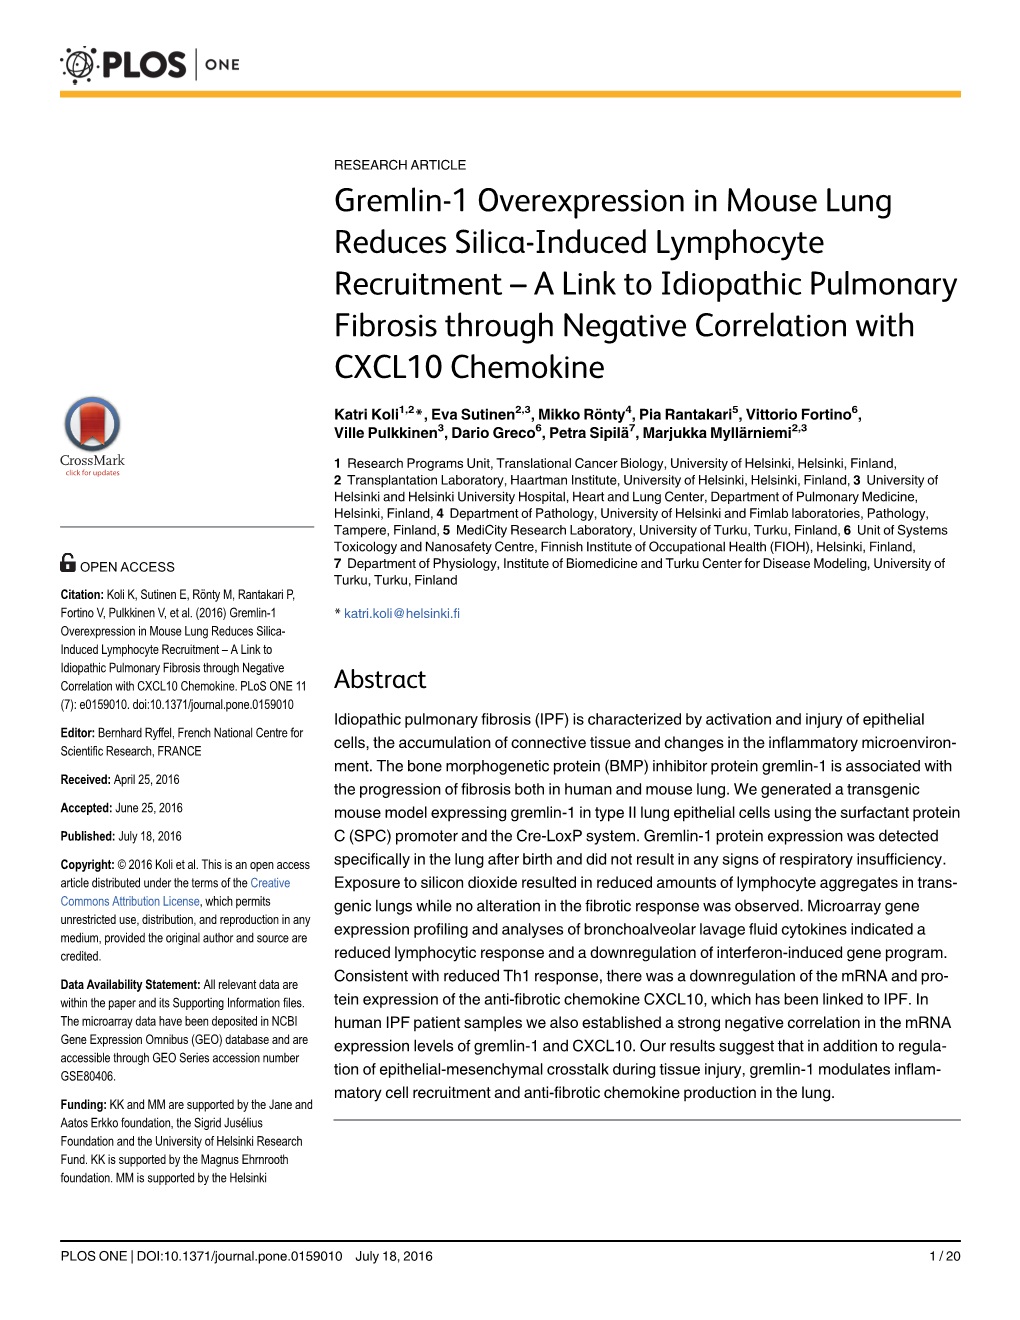 Gremlin-1 Overexpression in Mouse Lung Reduces Silica-Induced